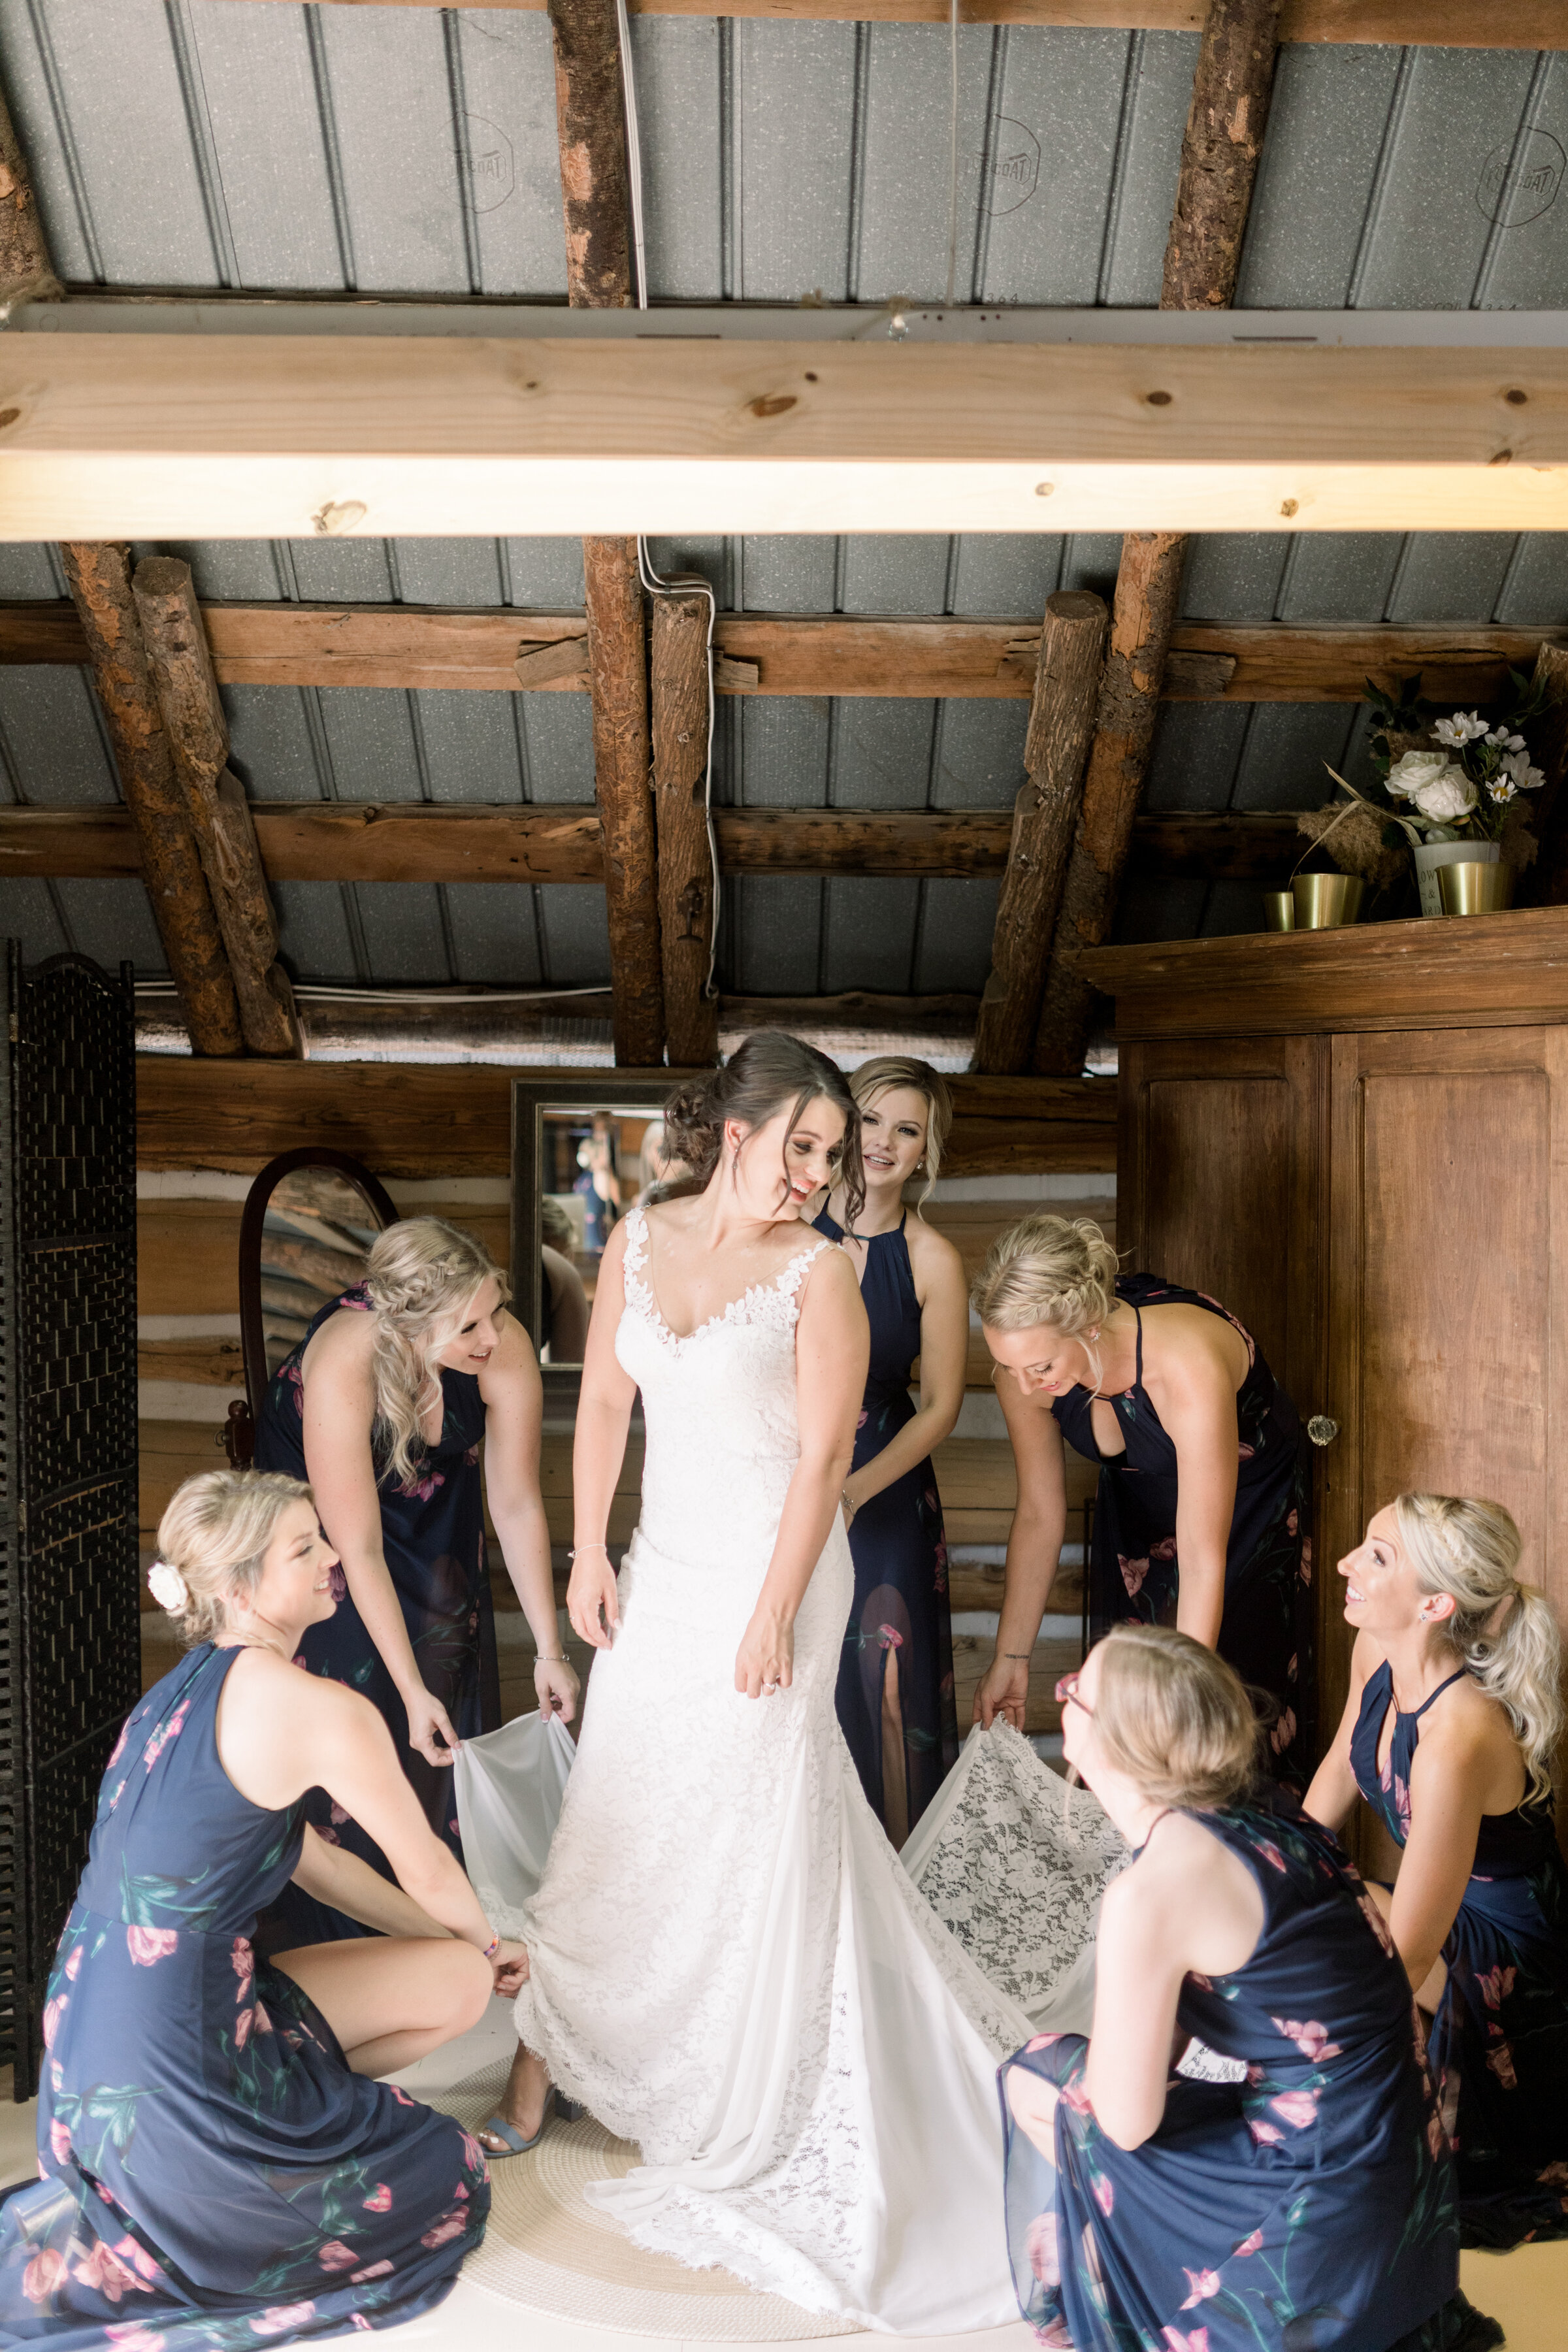  Beautiful bride with her bridal party all wearing blue dresses with a floral pattern and bride has blue shoes as an accent wedding color by Chelsea Mason Photography. ottawa on best wedding photograph in ottawa how to dress your bridal party blue we